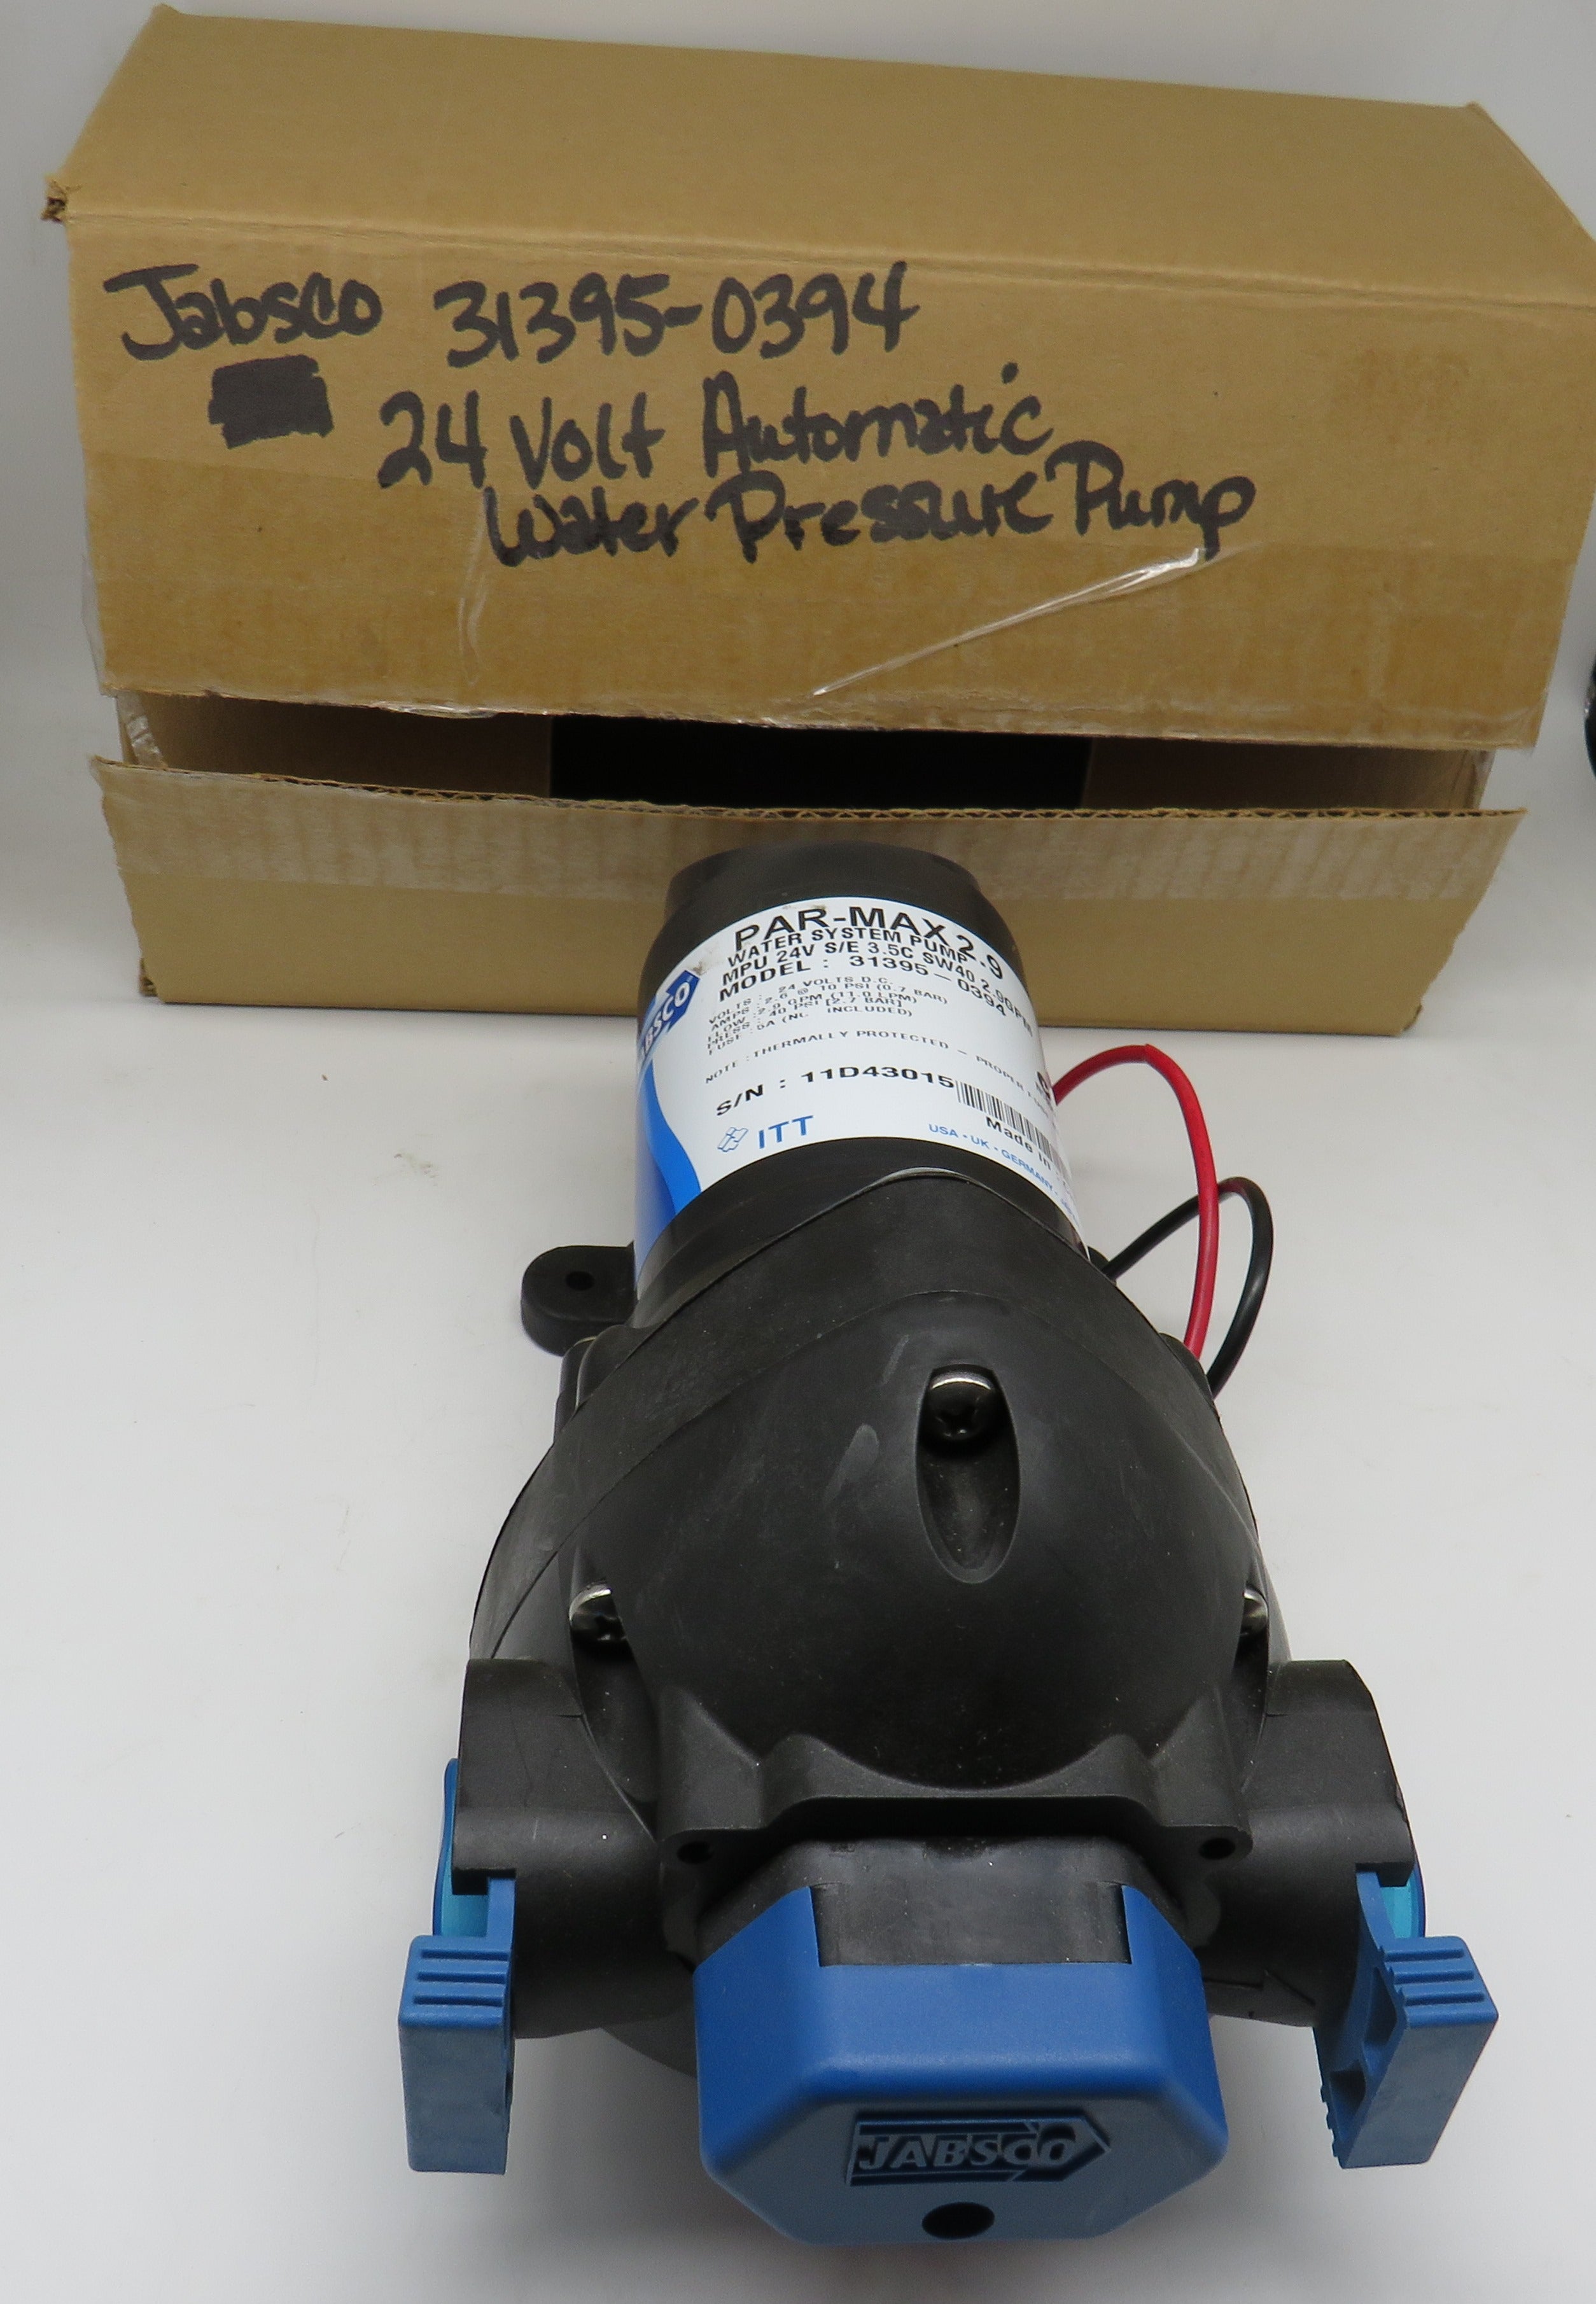 31395-0394 Jabsco 24 Volt Automatic Water Pressure Pump Max Series 2.9 for 3+ Outlets